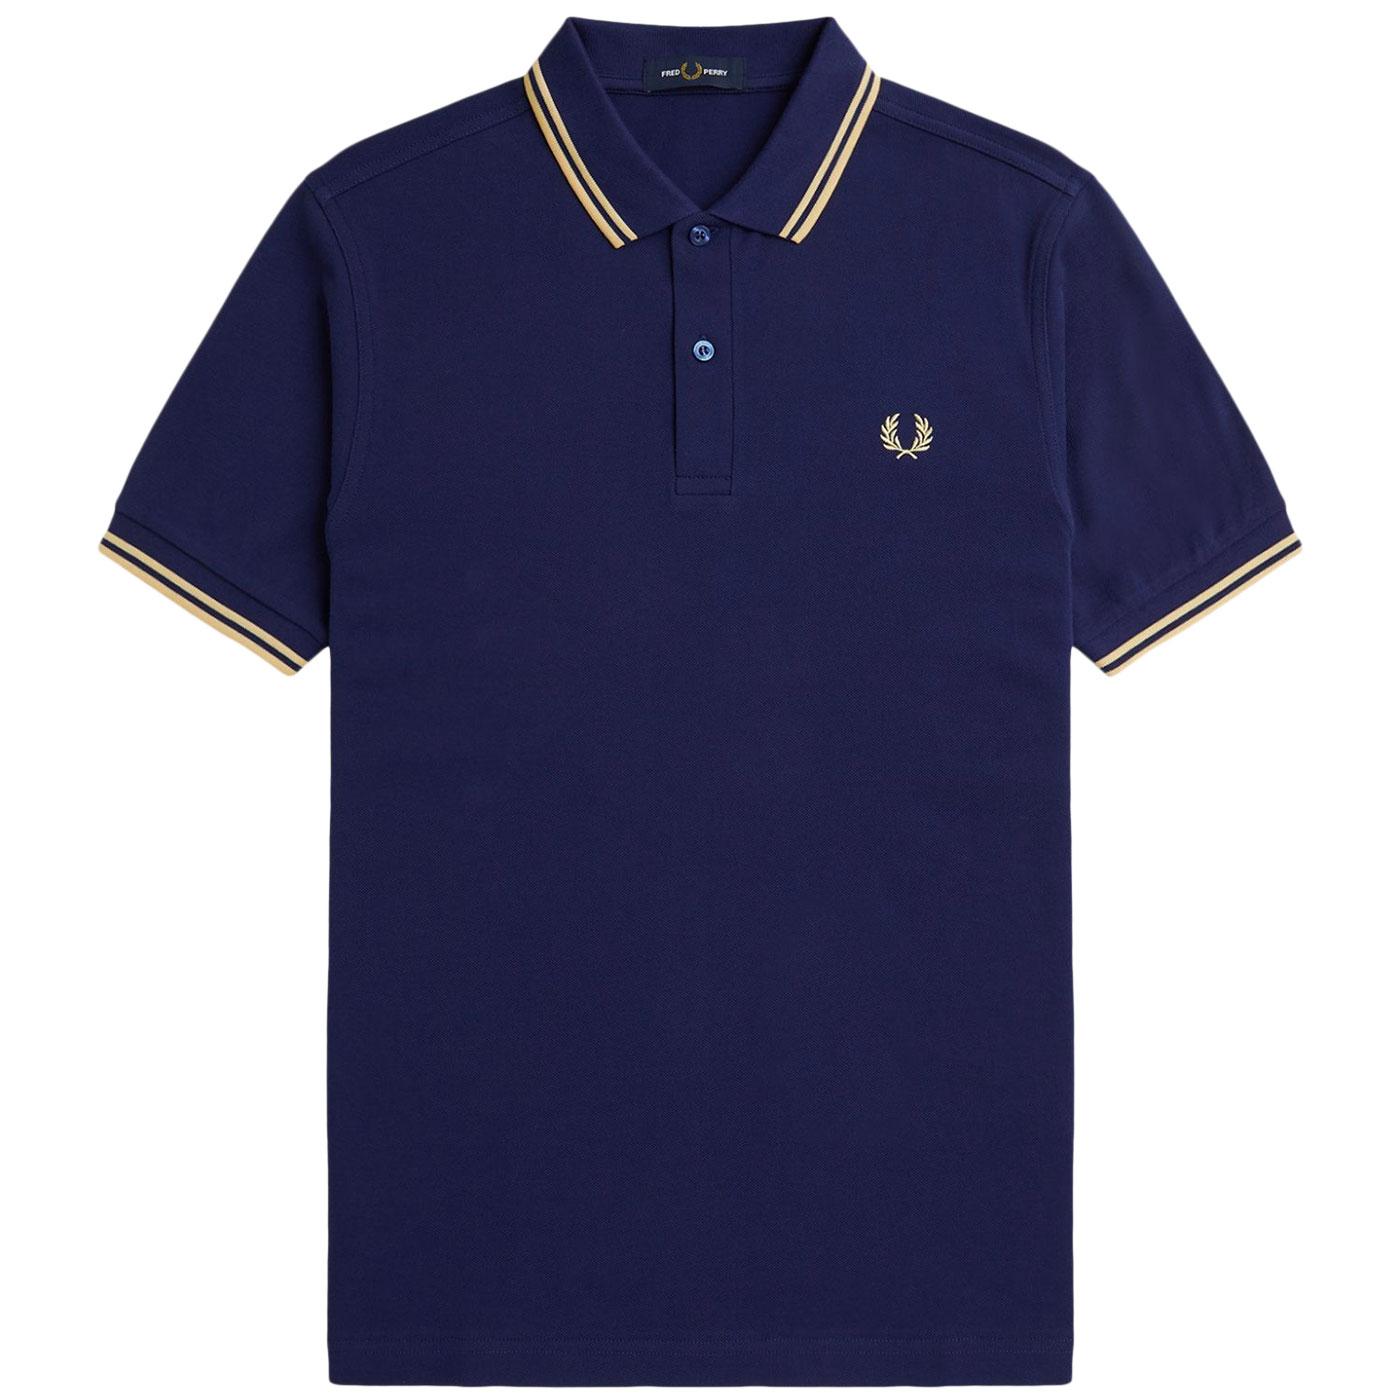 FRED PERRY M3600 Mod Twin Tipped Polo Shirt FN/IC